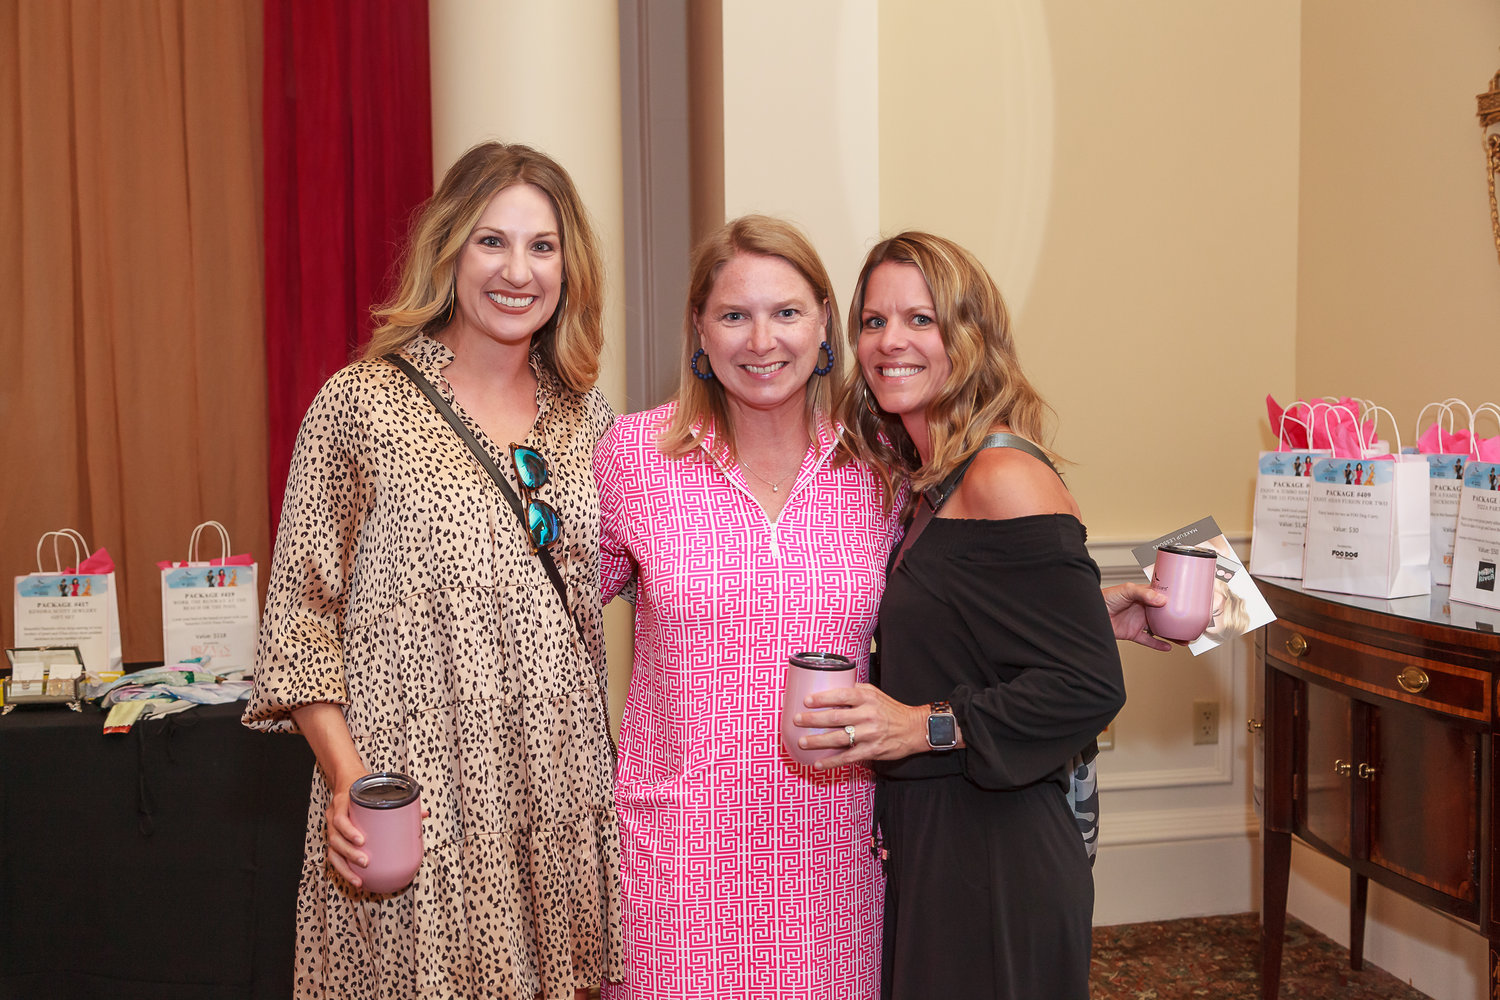 The Wine, Women & Shoes event was an evening of fun for attendees.